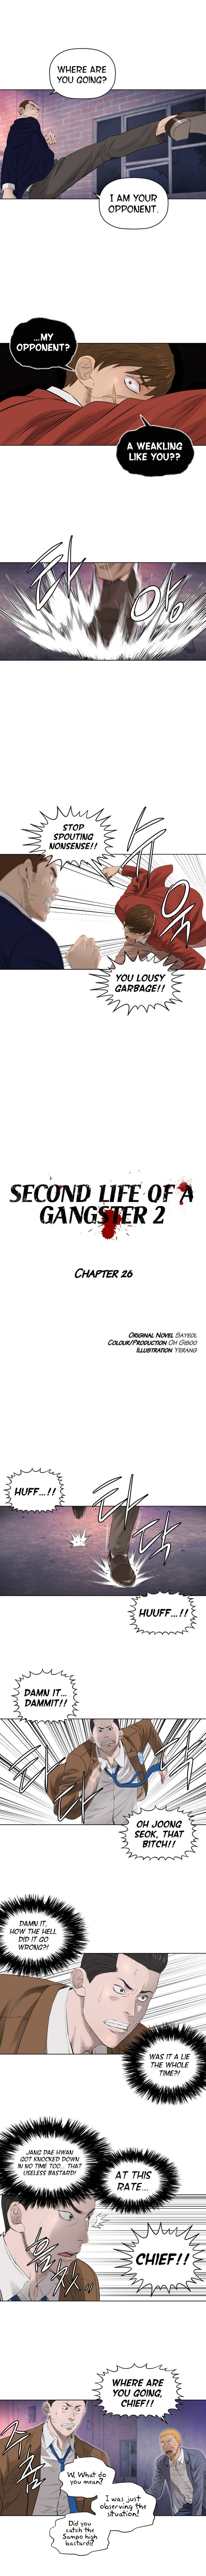 second-life-of-a-gangster-chap-78-2